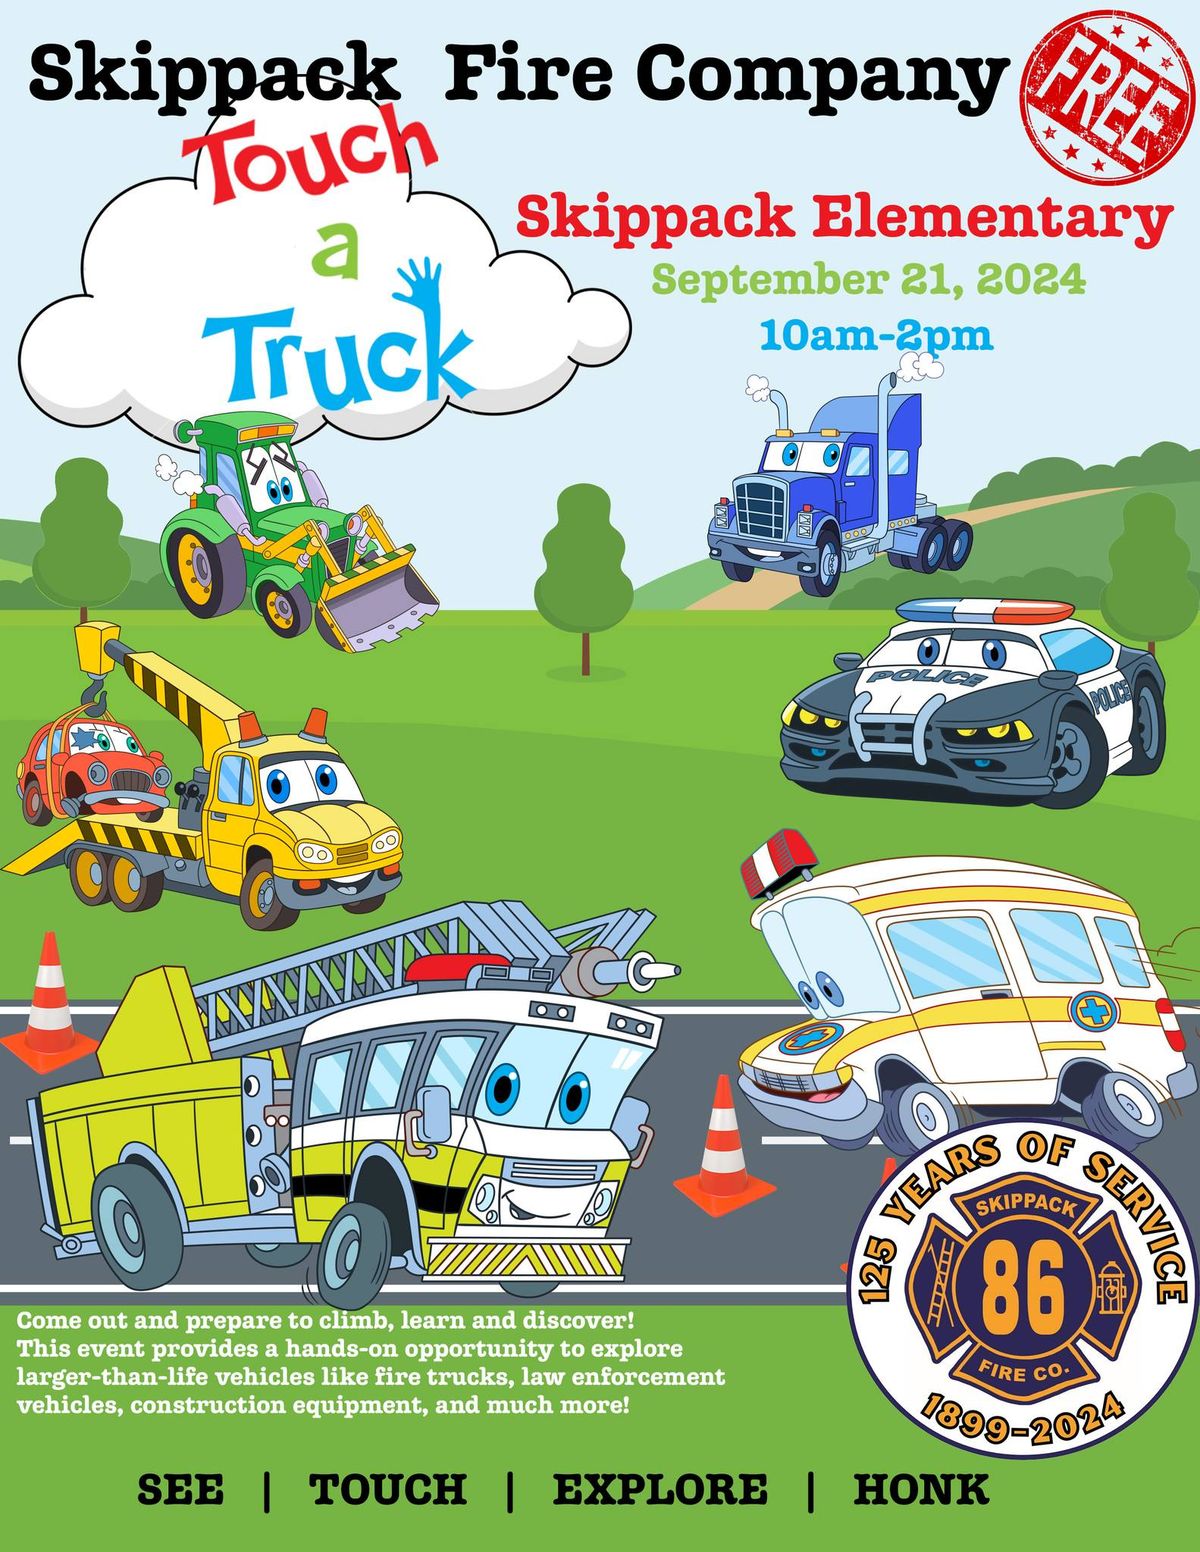 Skippack Fire Company Touch-a-Truck